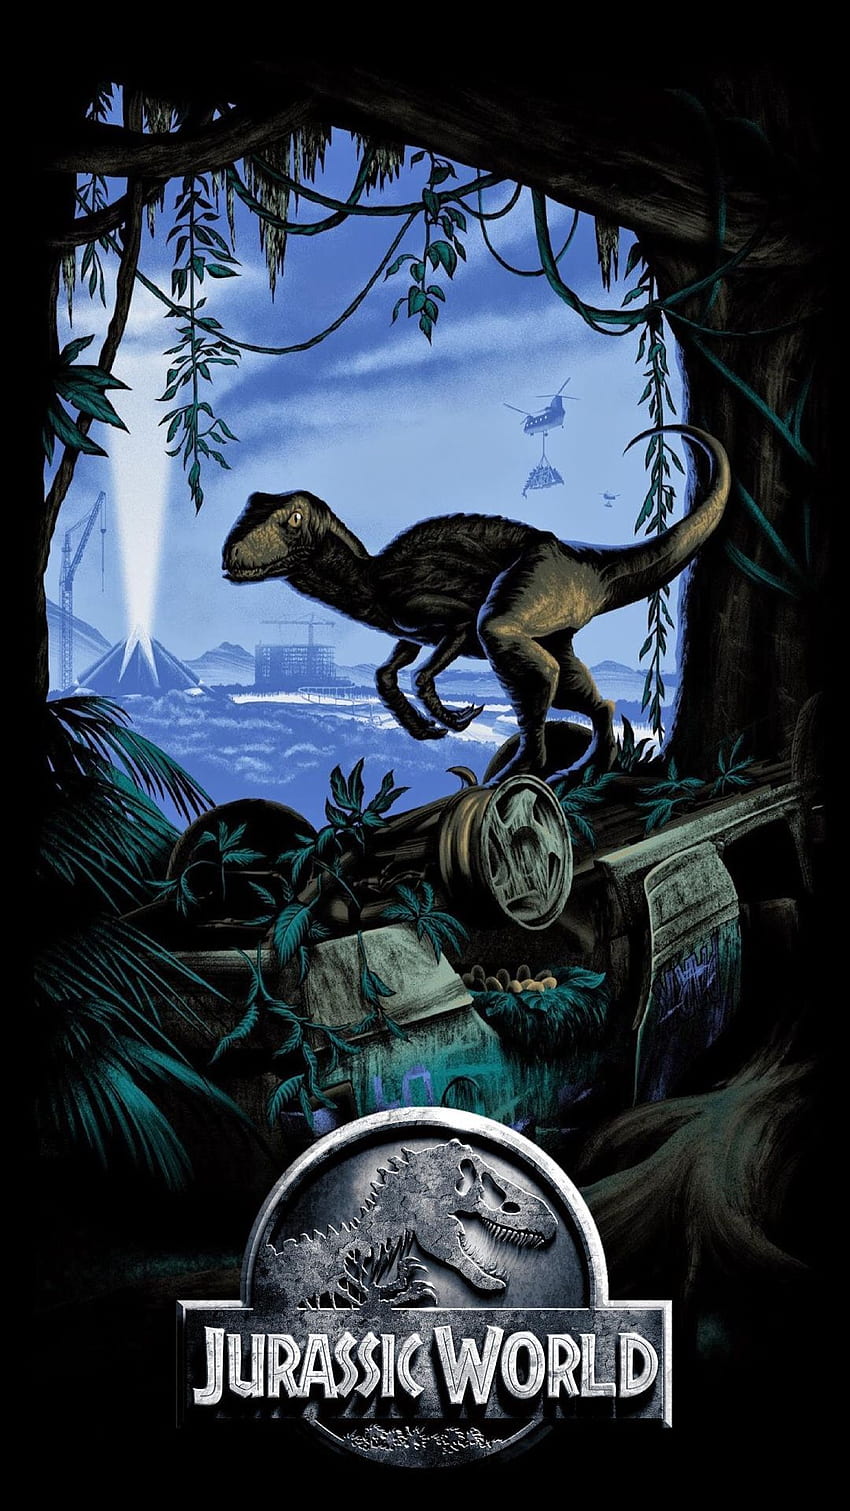 Checkout this for your iPhone: w10619847?src=ios&v=2.2 via. Jurassic world poster, Jurassic world , Jurassic park world HD phone wallpaper